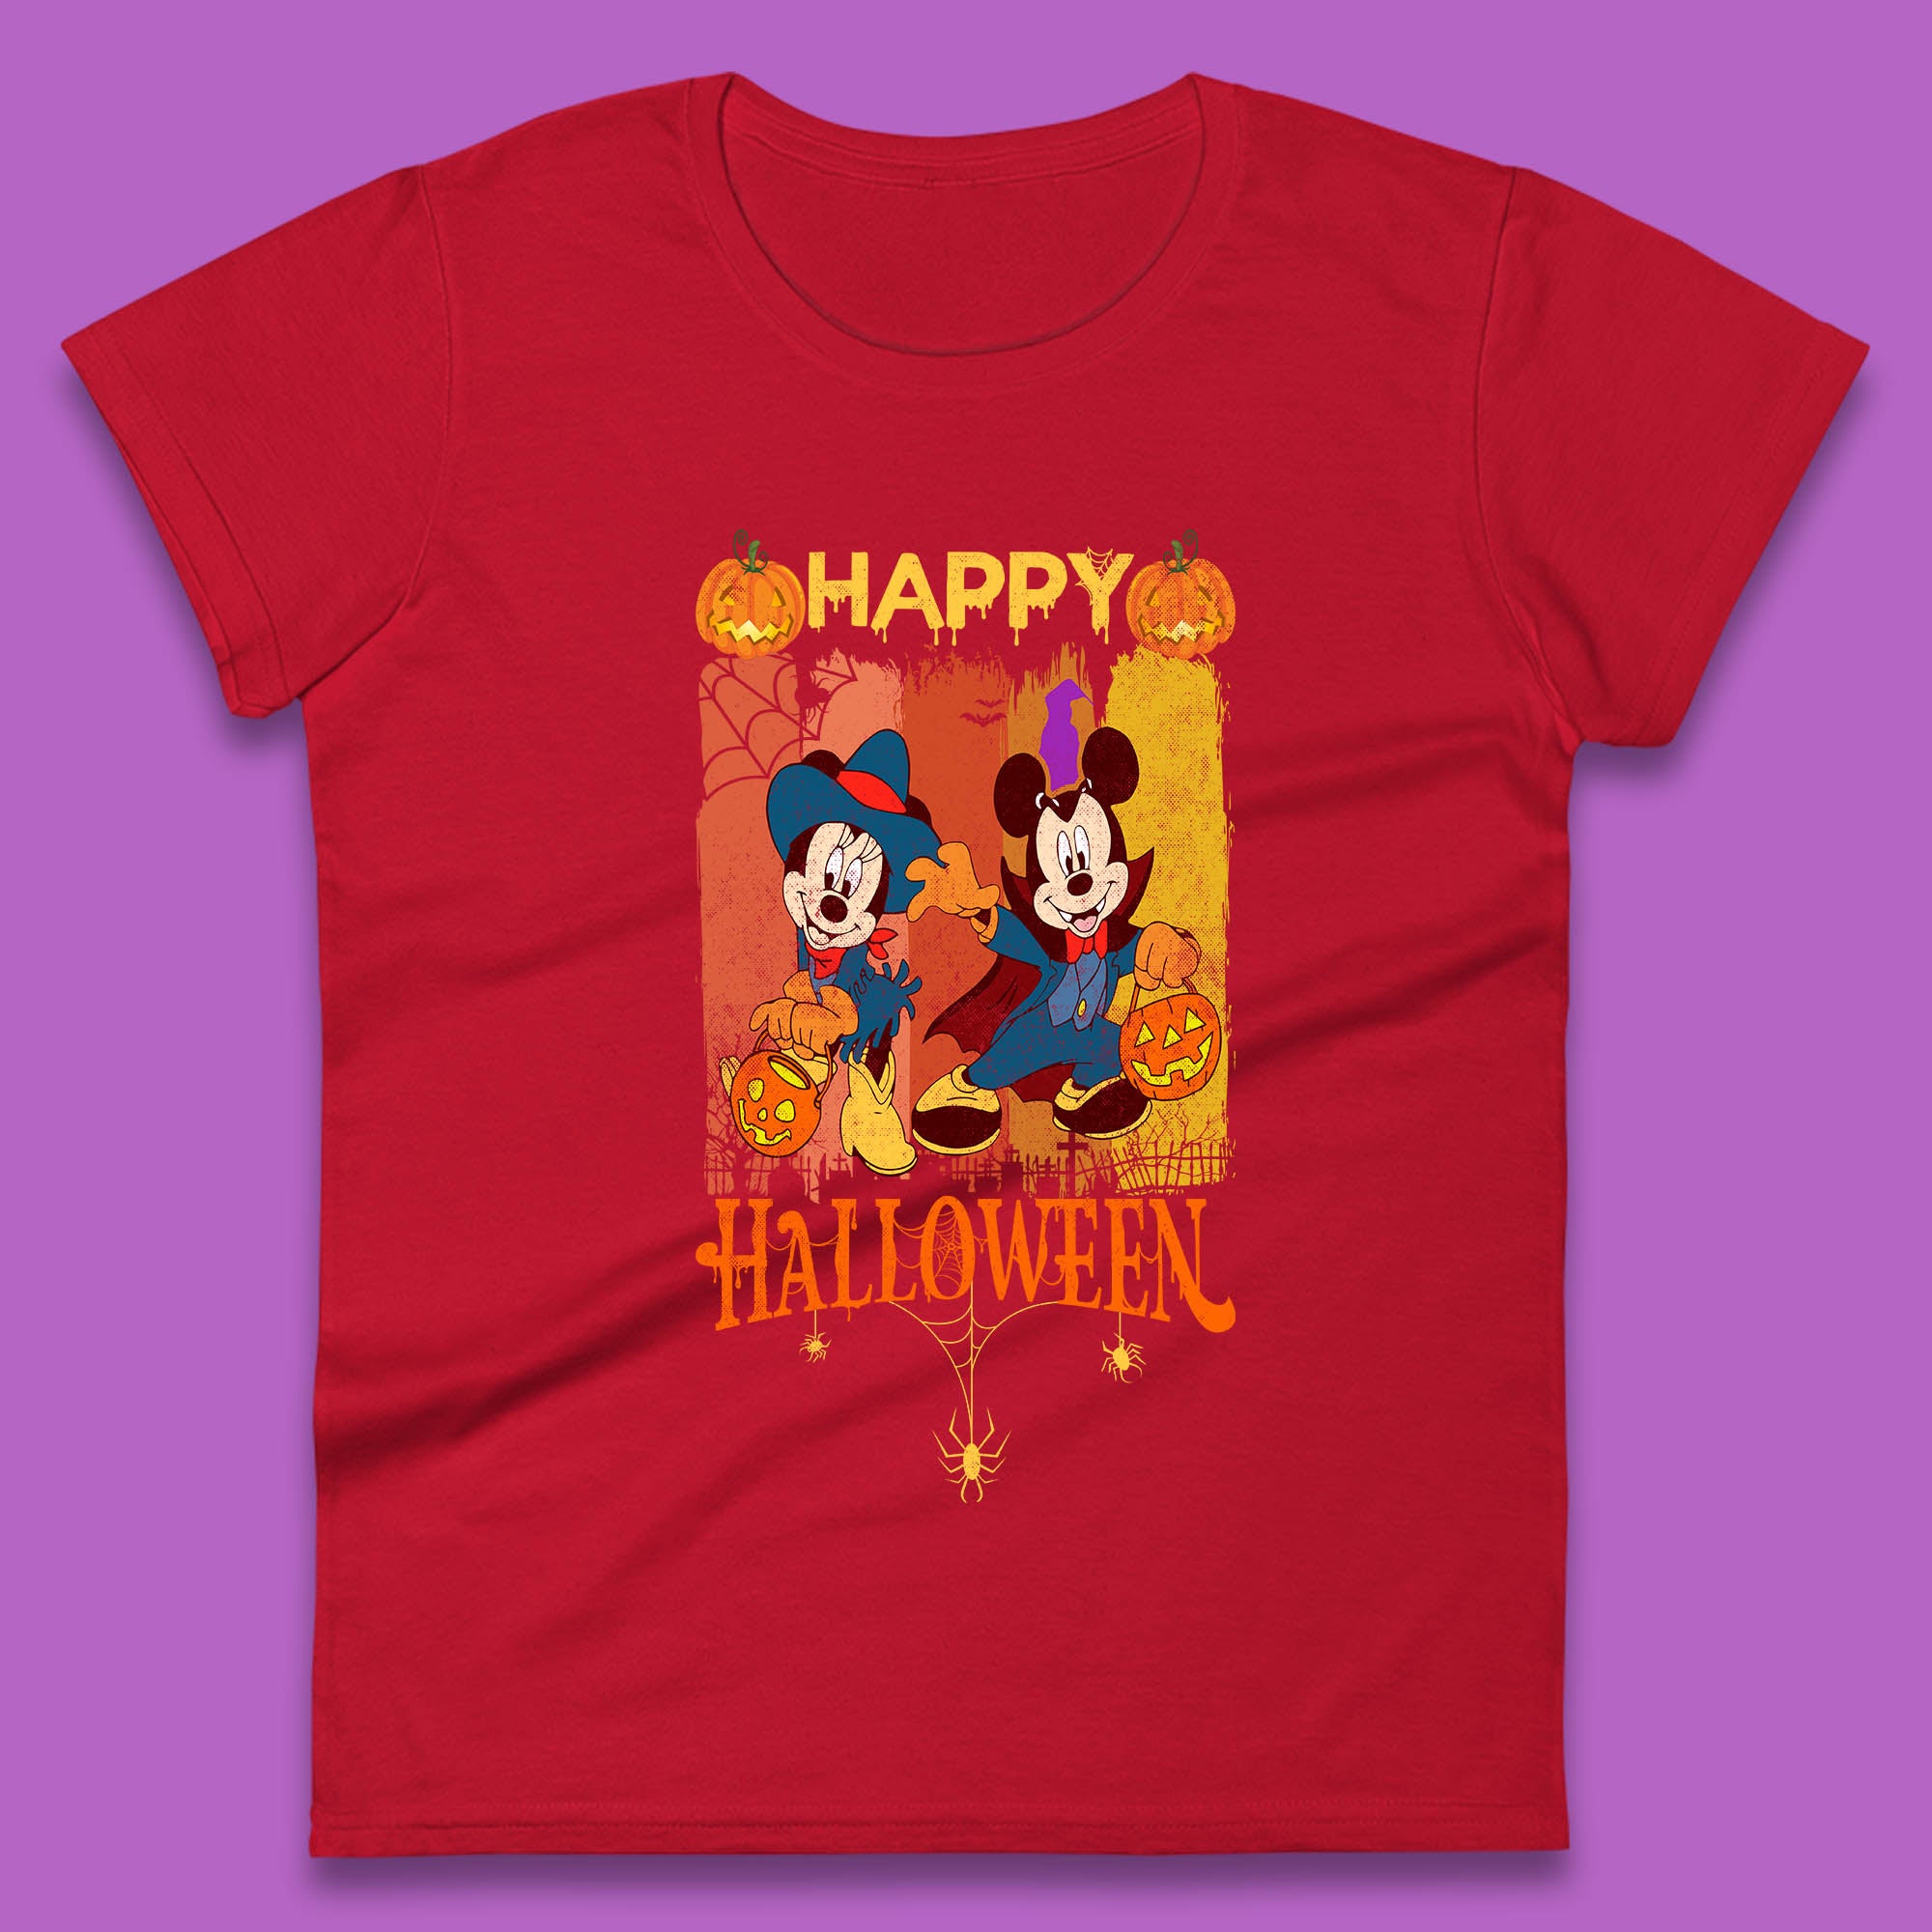 Happy Halloween Disney Witch Mickey Mouse Minnie Mouse Horror Scary Disneyland Trip Womens Tee Top